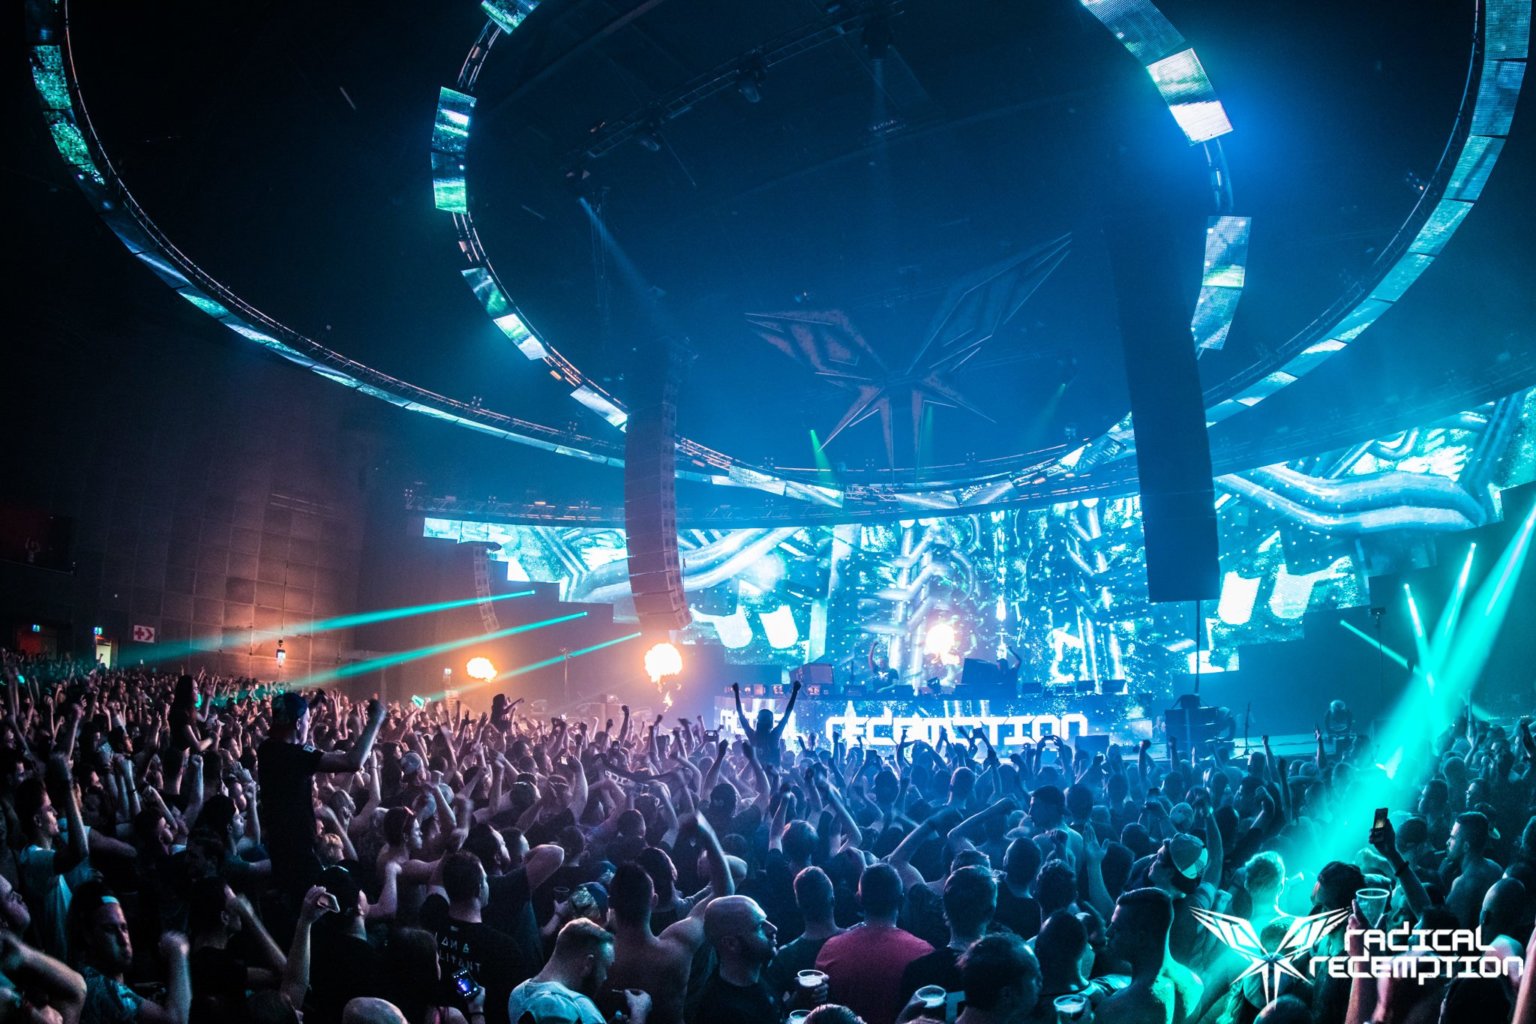 Radical Redemption looks back on previous editions